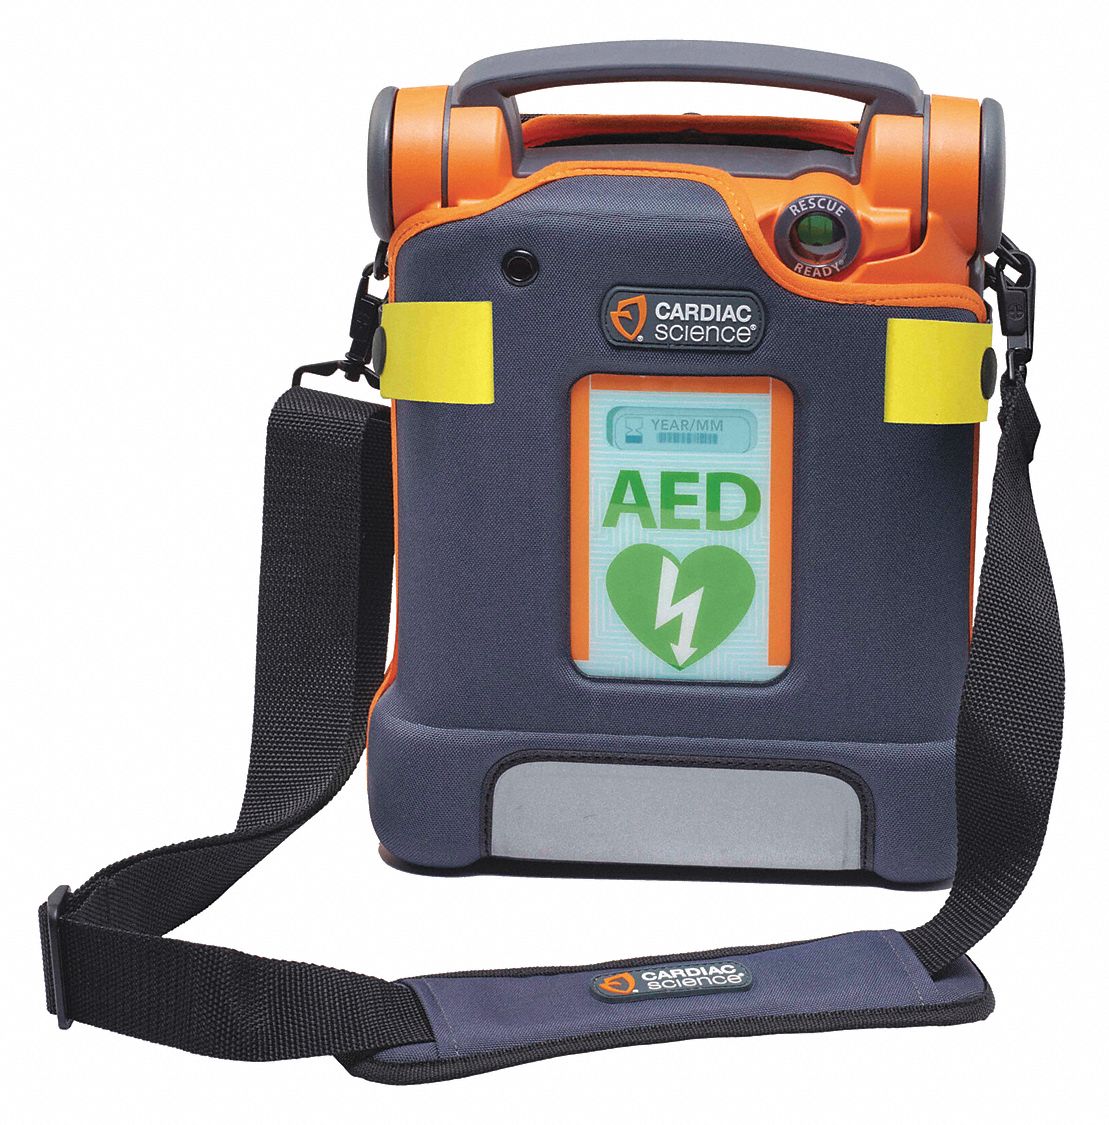 G5 AED Premium Carry Case: For Powerheart G5 AED